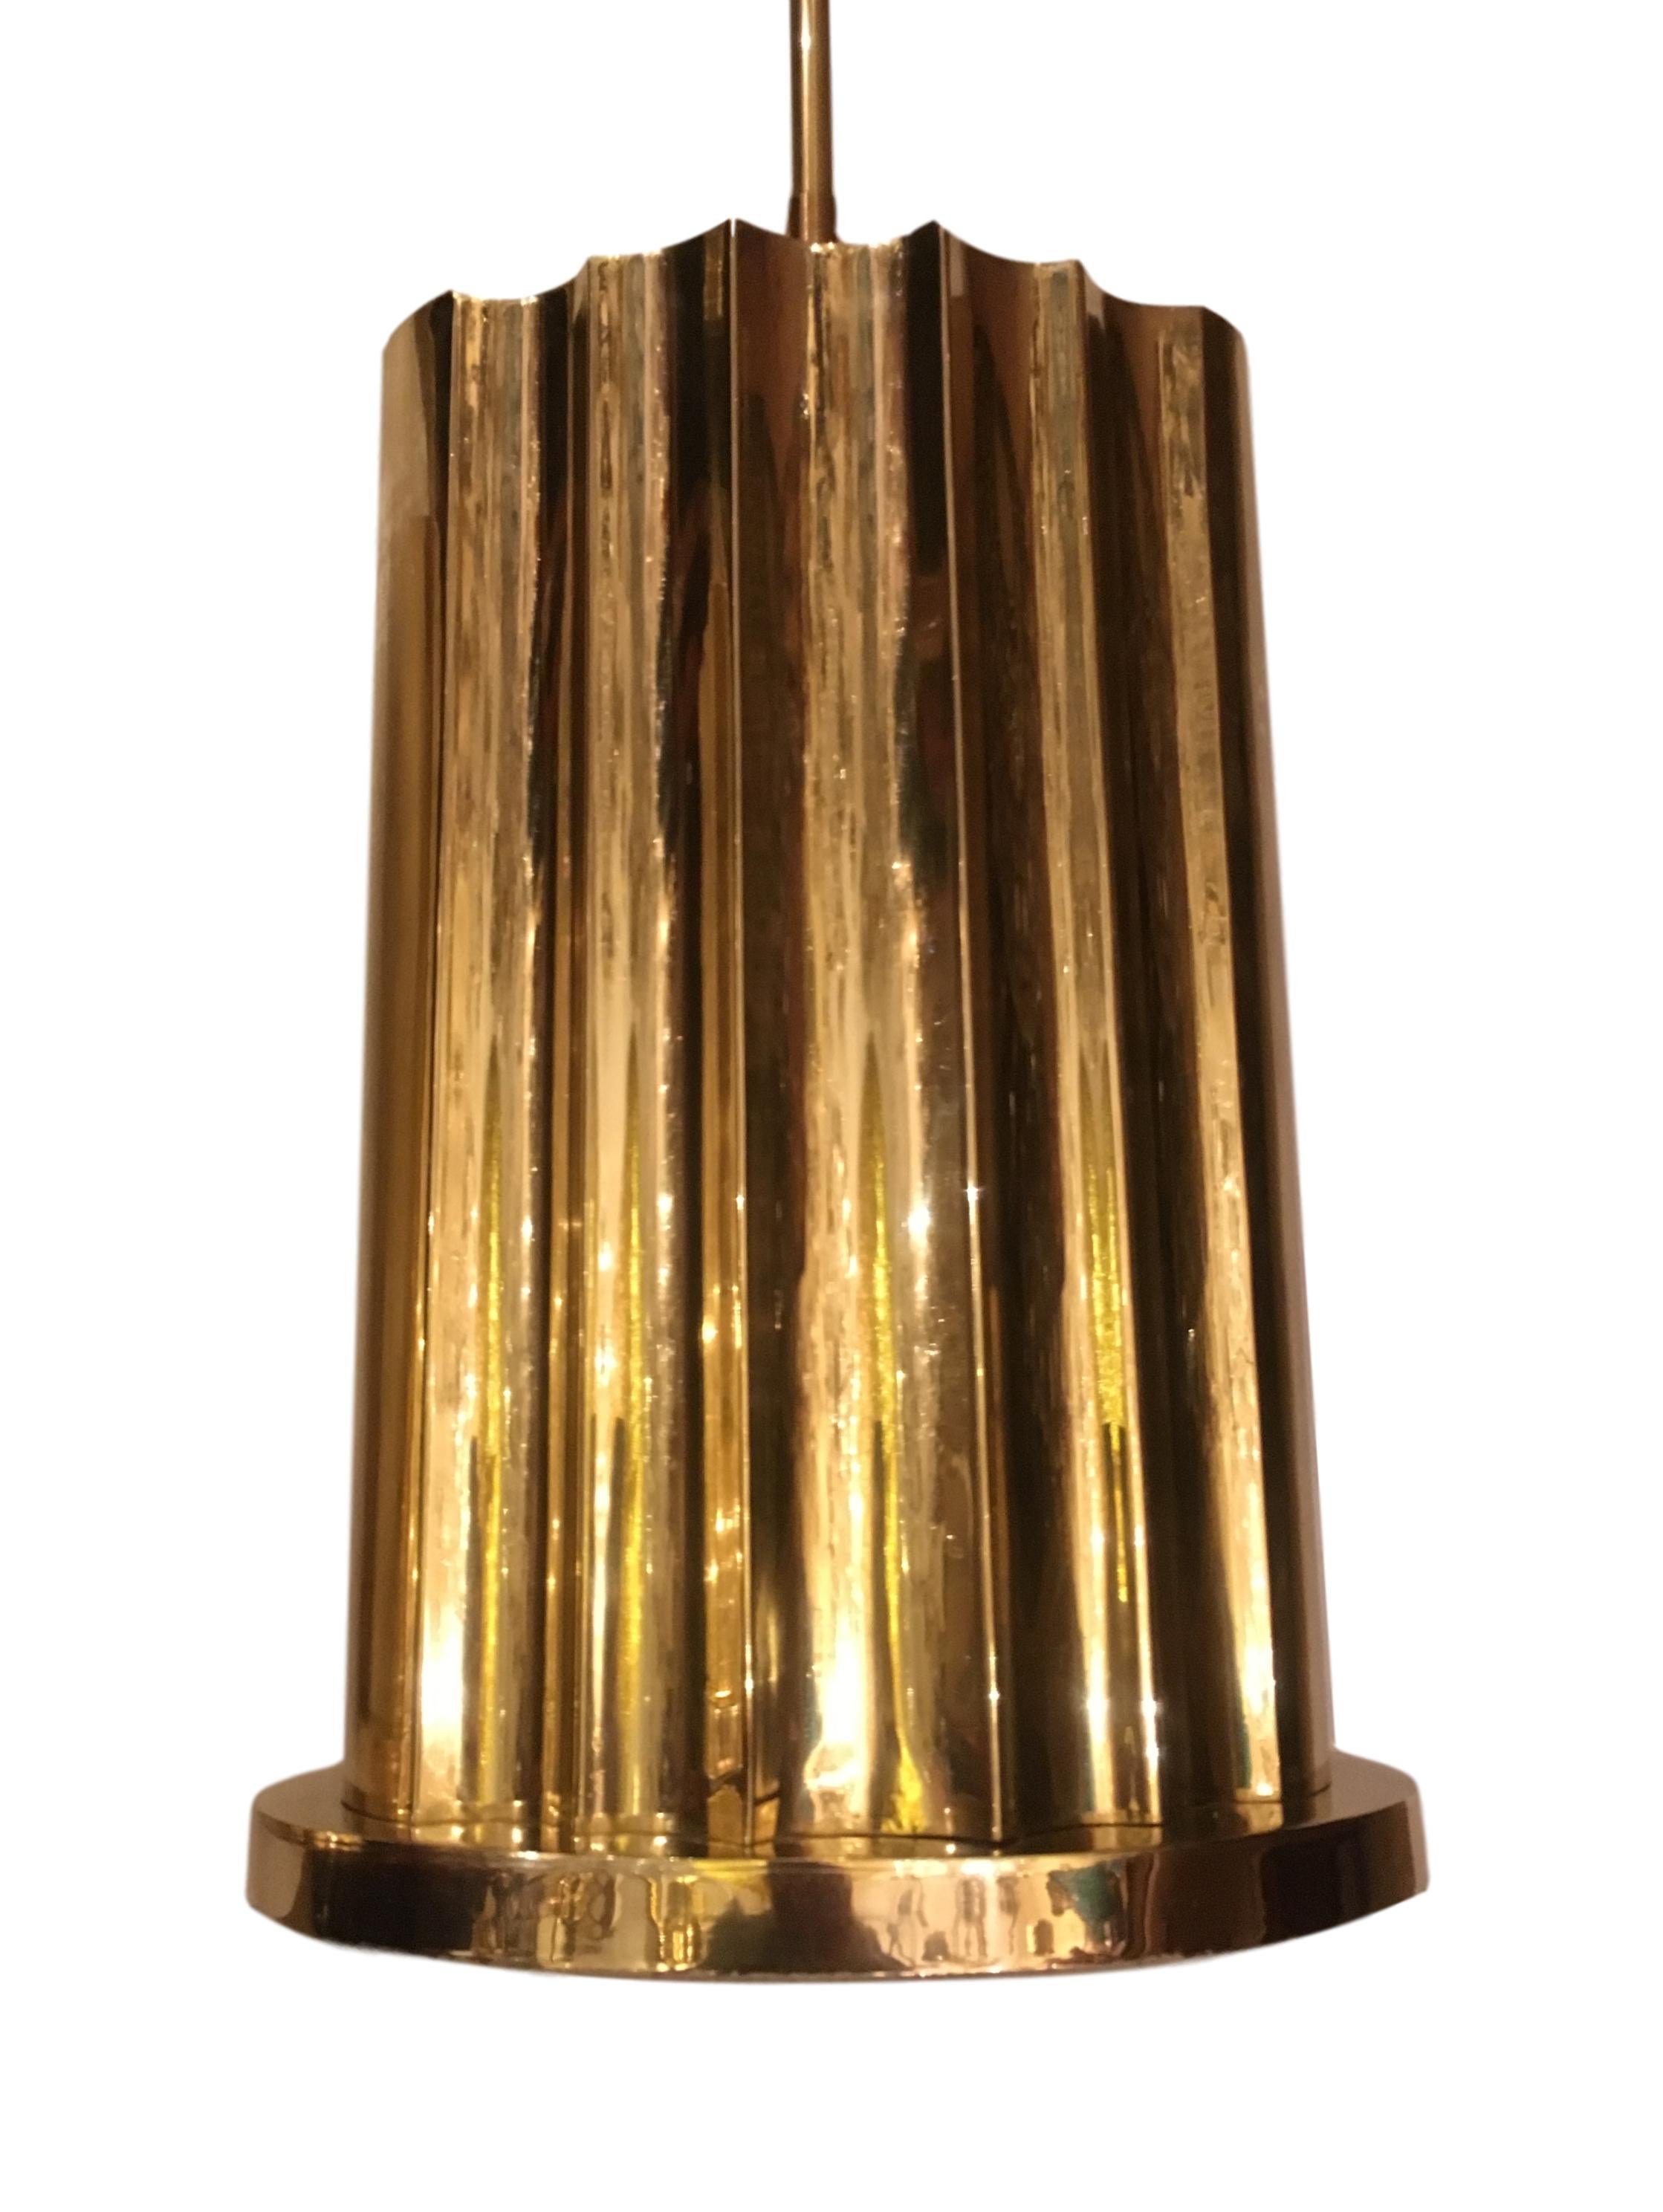 A pair of circa 1960s Italian hammered brass table lamps in a fluted/scalloped shape. 

Measurements:
Height of body: 15.5